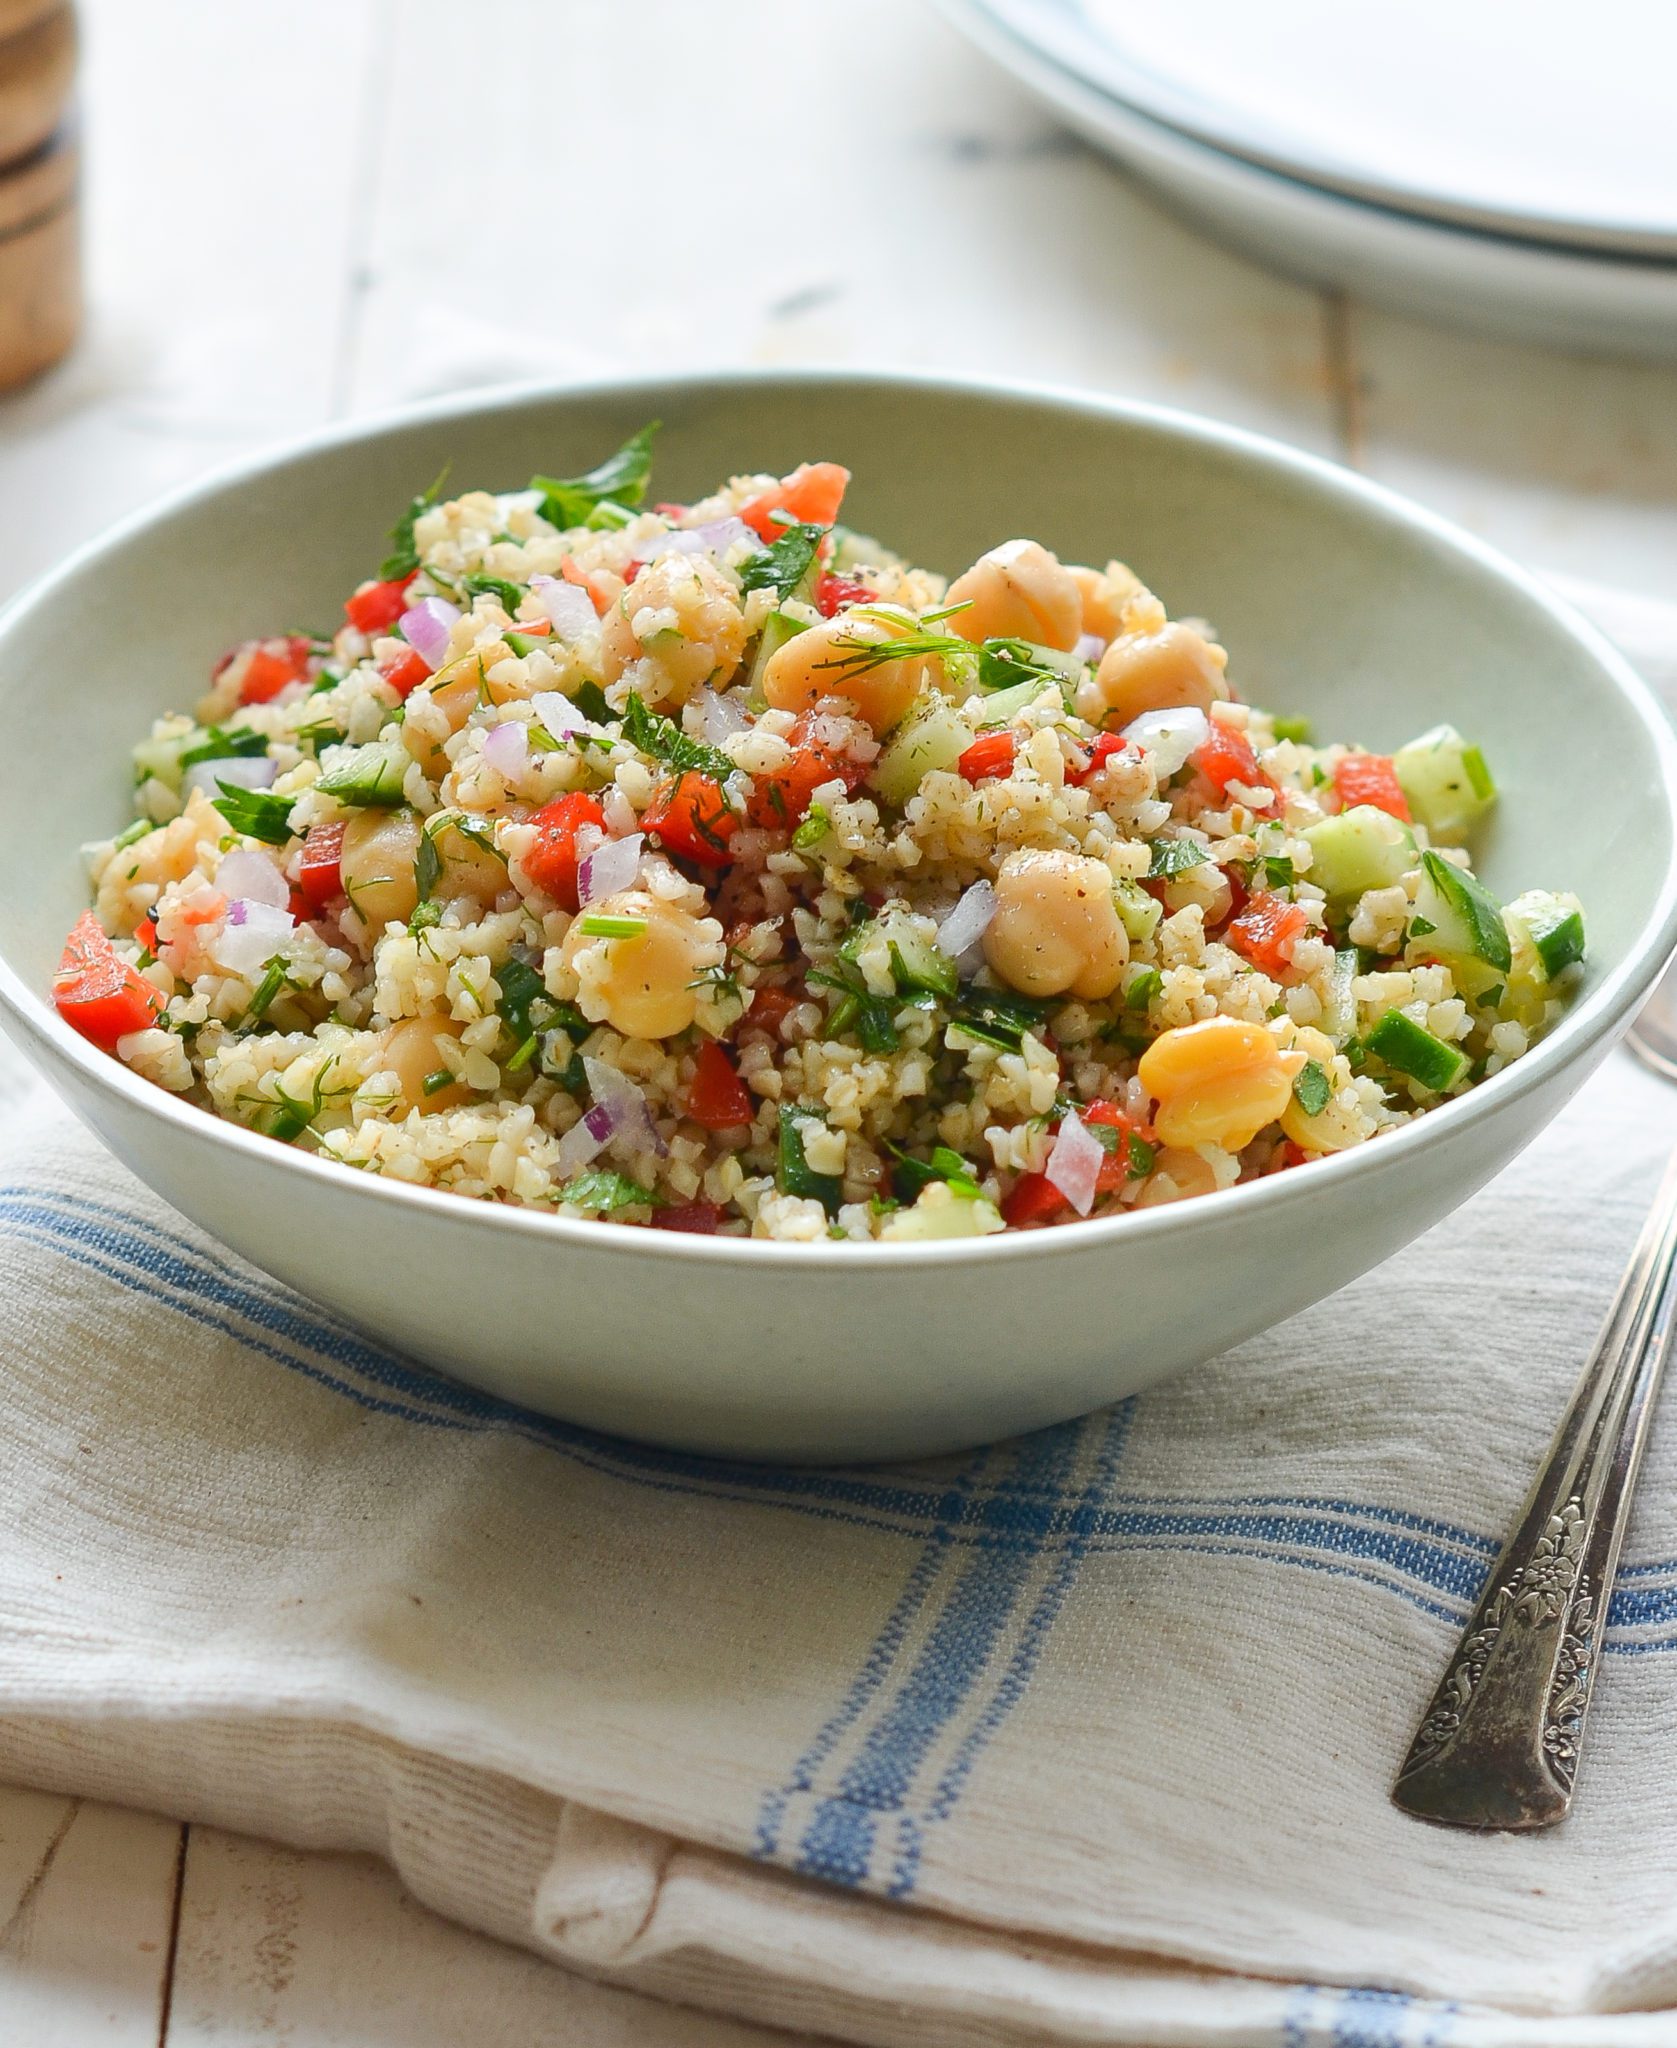 Bulgur Salad with Cucumbers, Red Peppers, Chick Peas, Lemon and Dill